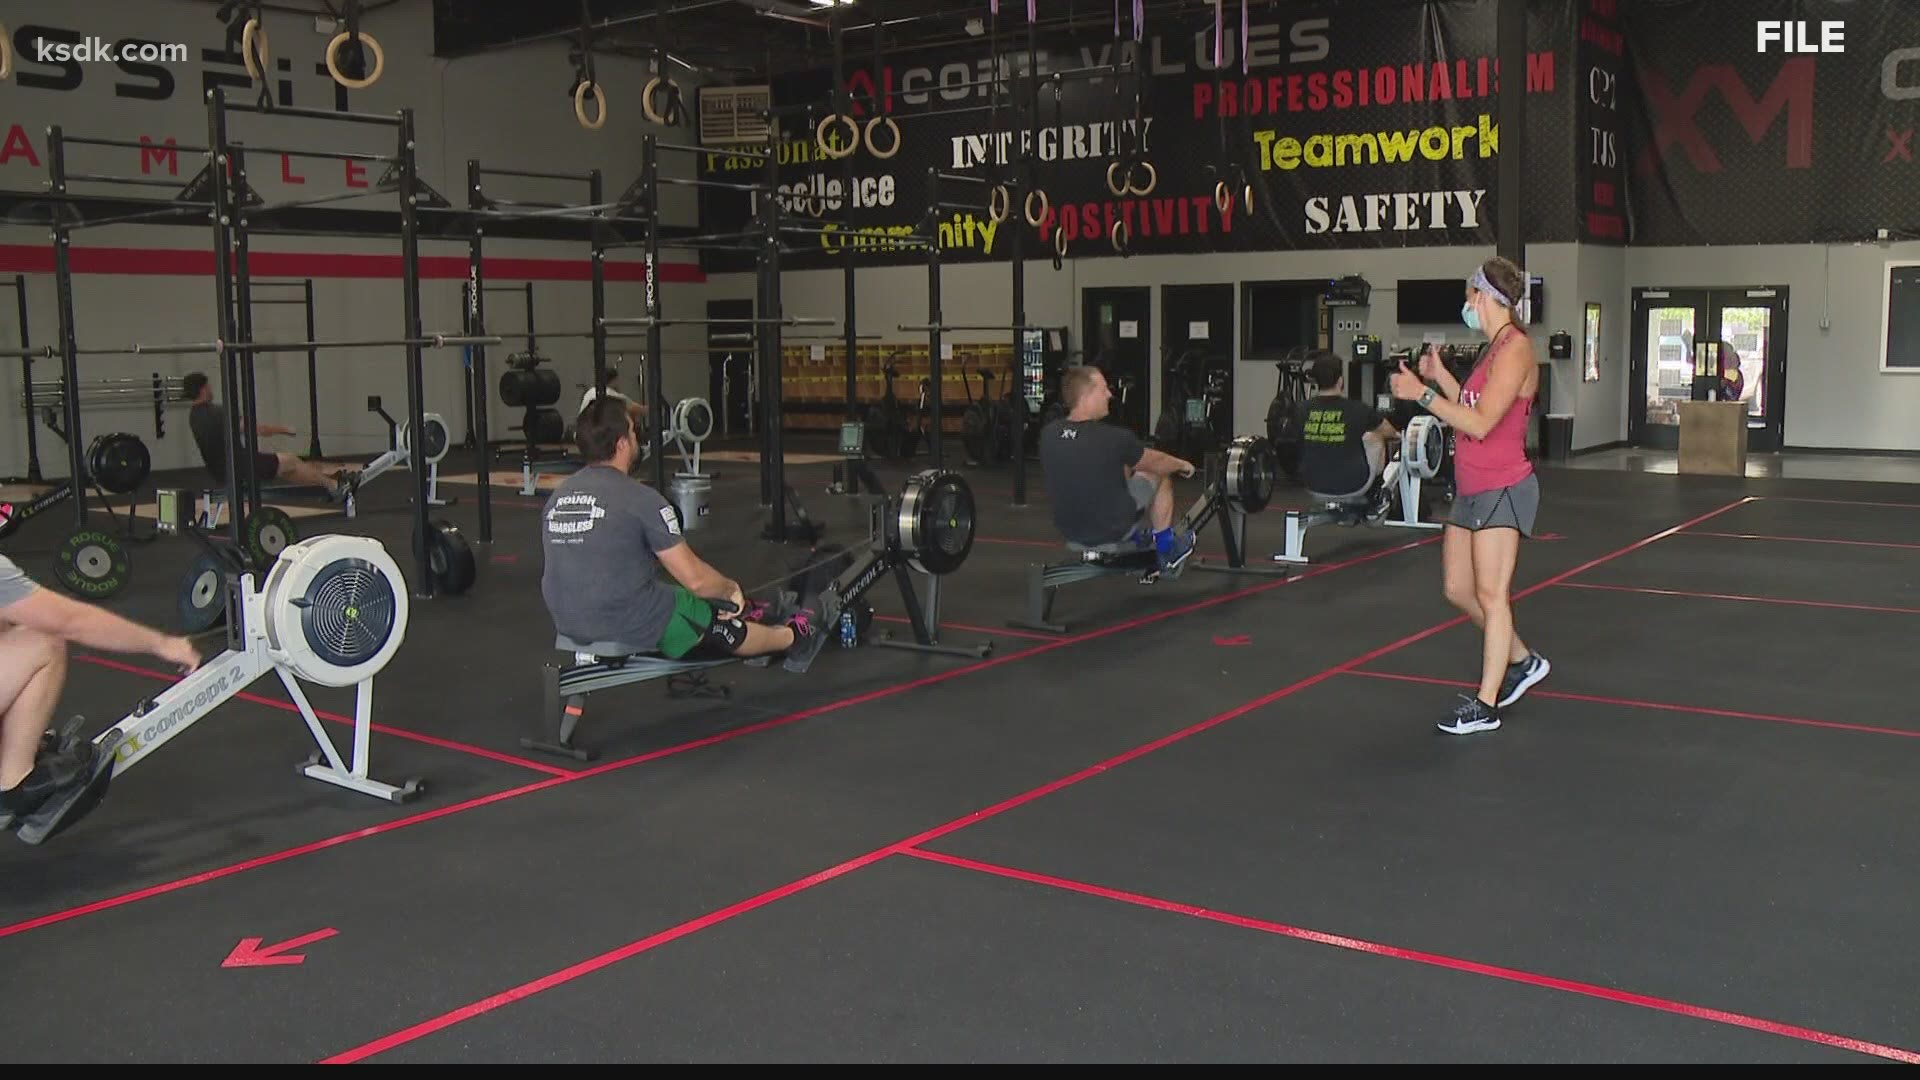 New guidelines for St. Louis County gyms | www.semashow.com